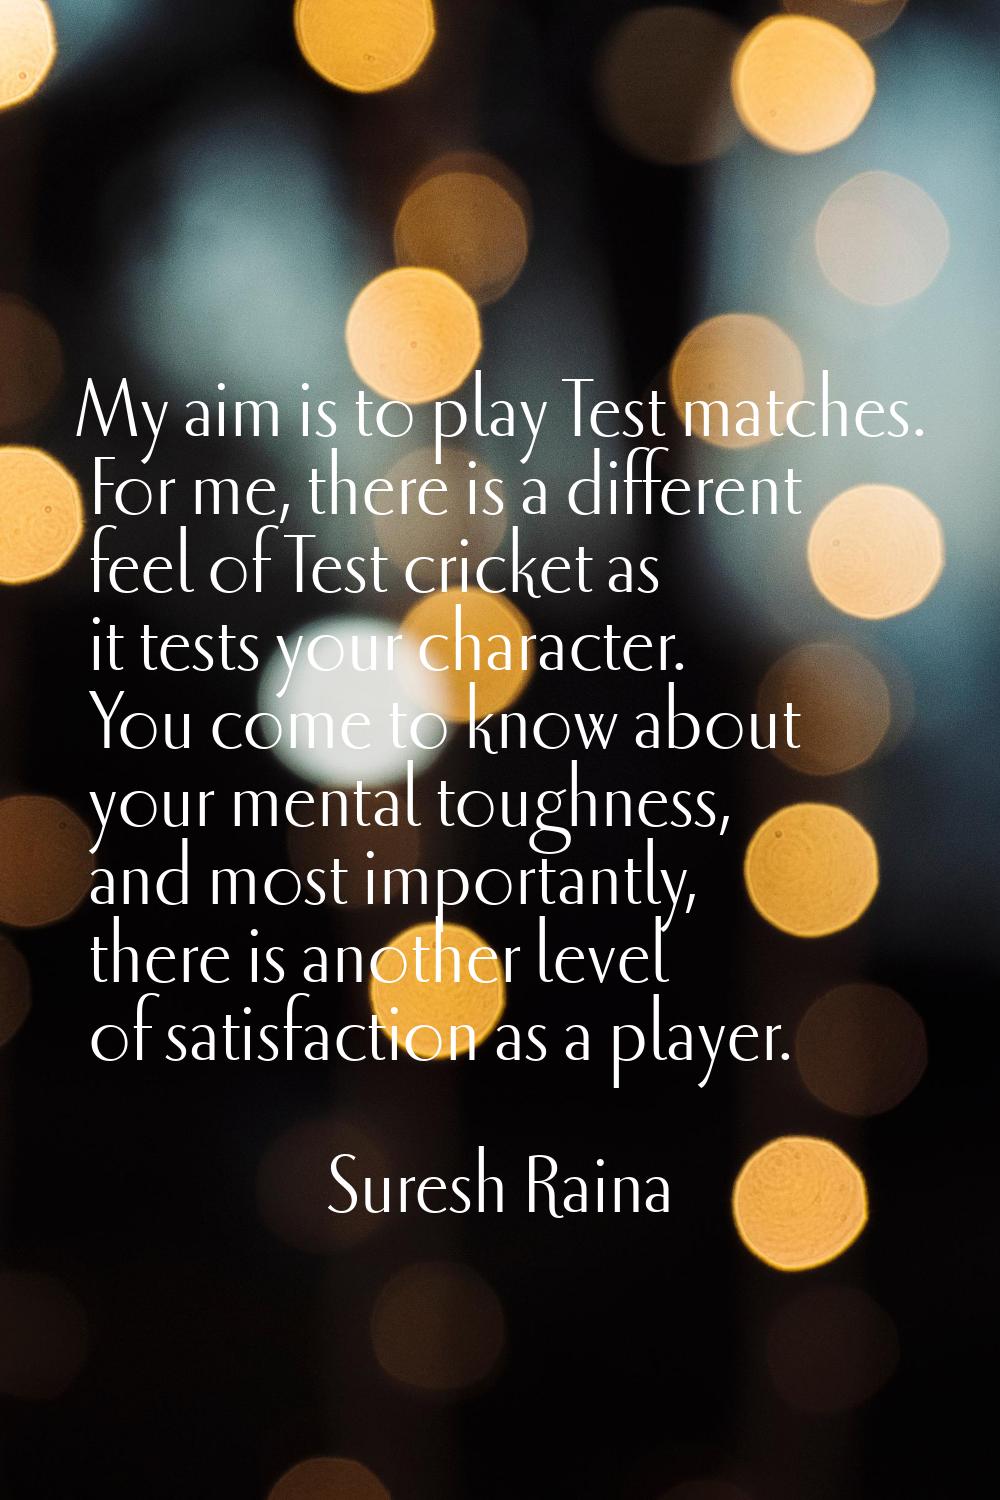 My aim is to play Test matches. For me, there is a different feel of Test cricket as it tests your 